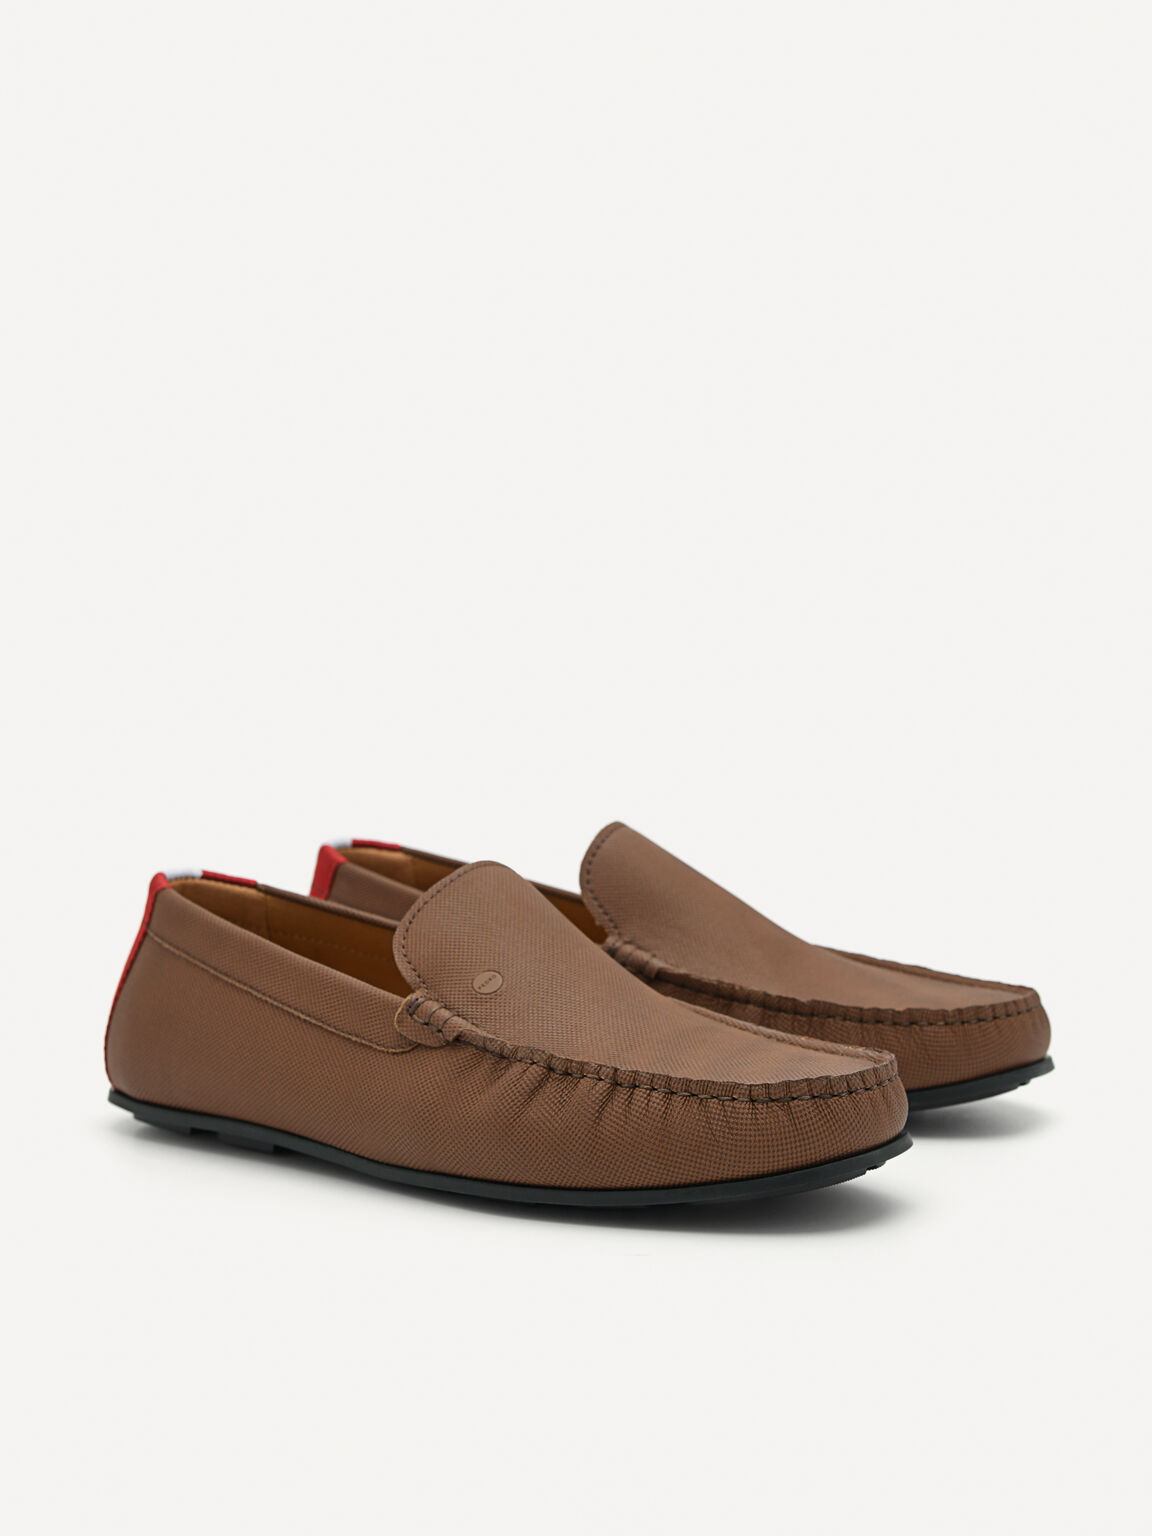 Leather & Fabric Slip-On Moccasins, Brown